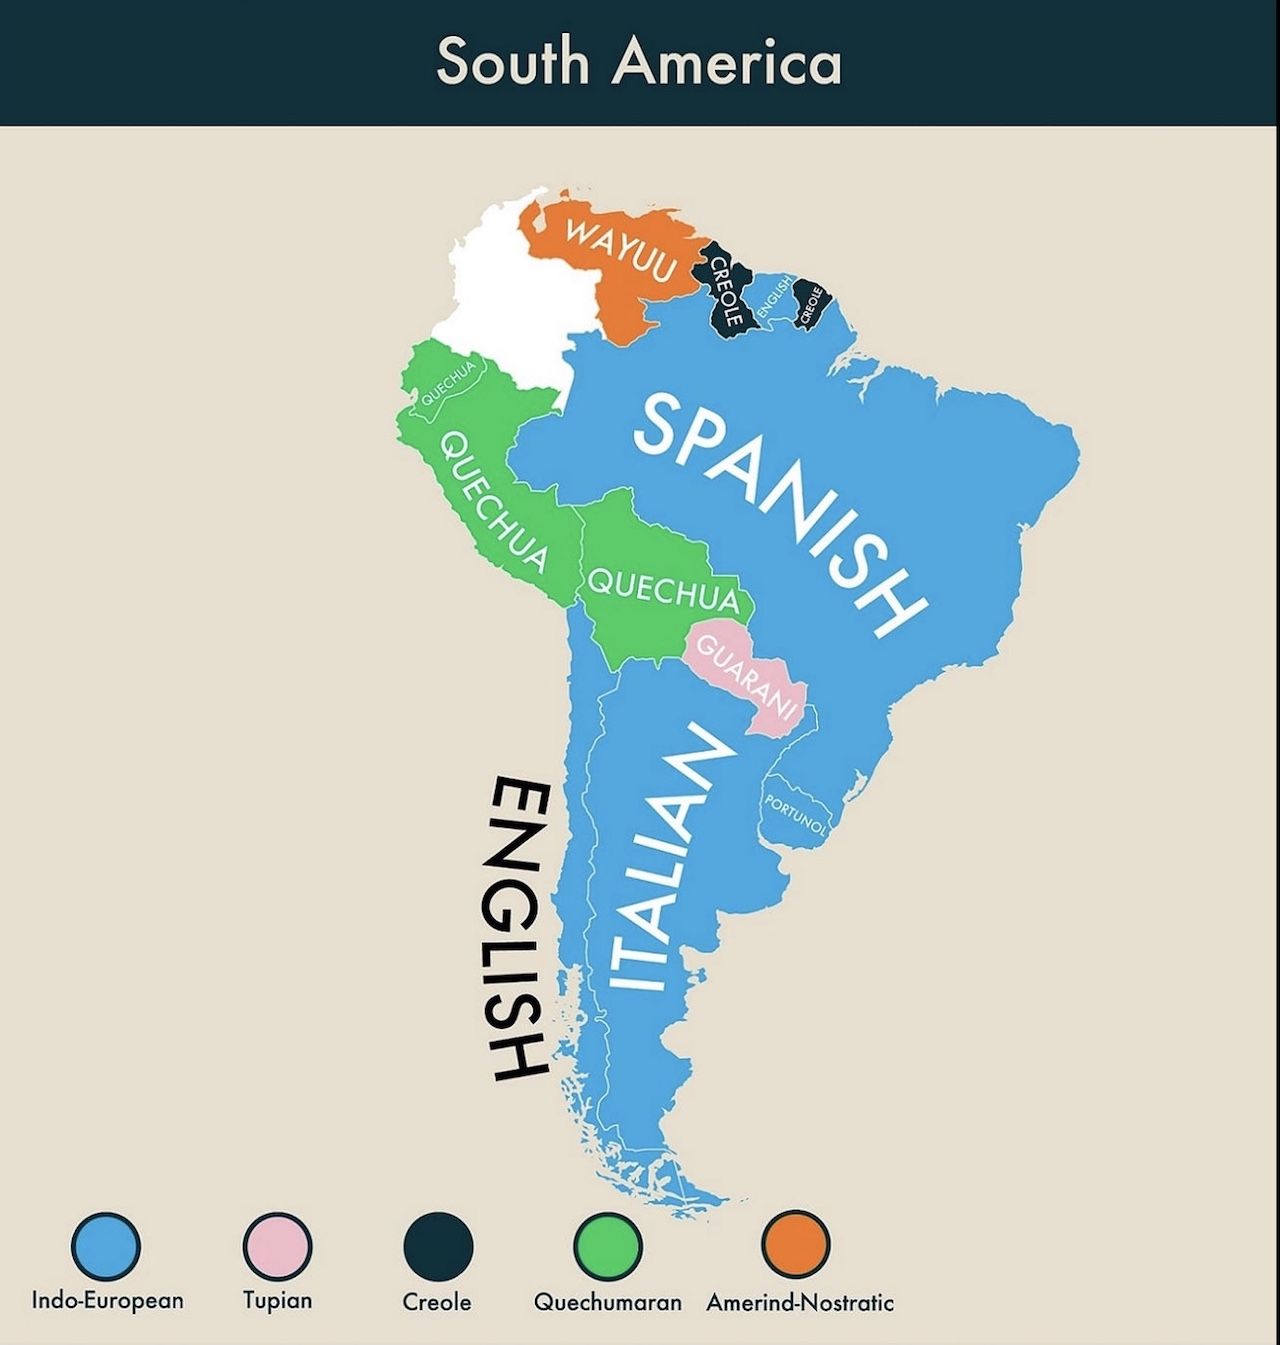 South America most commonly spoken second language